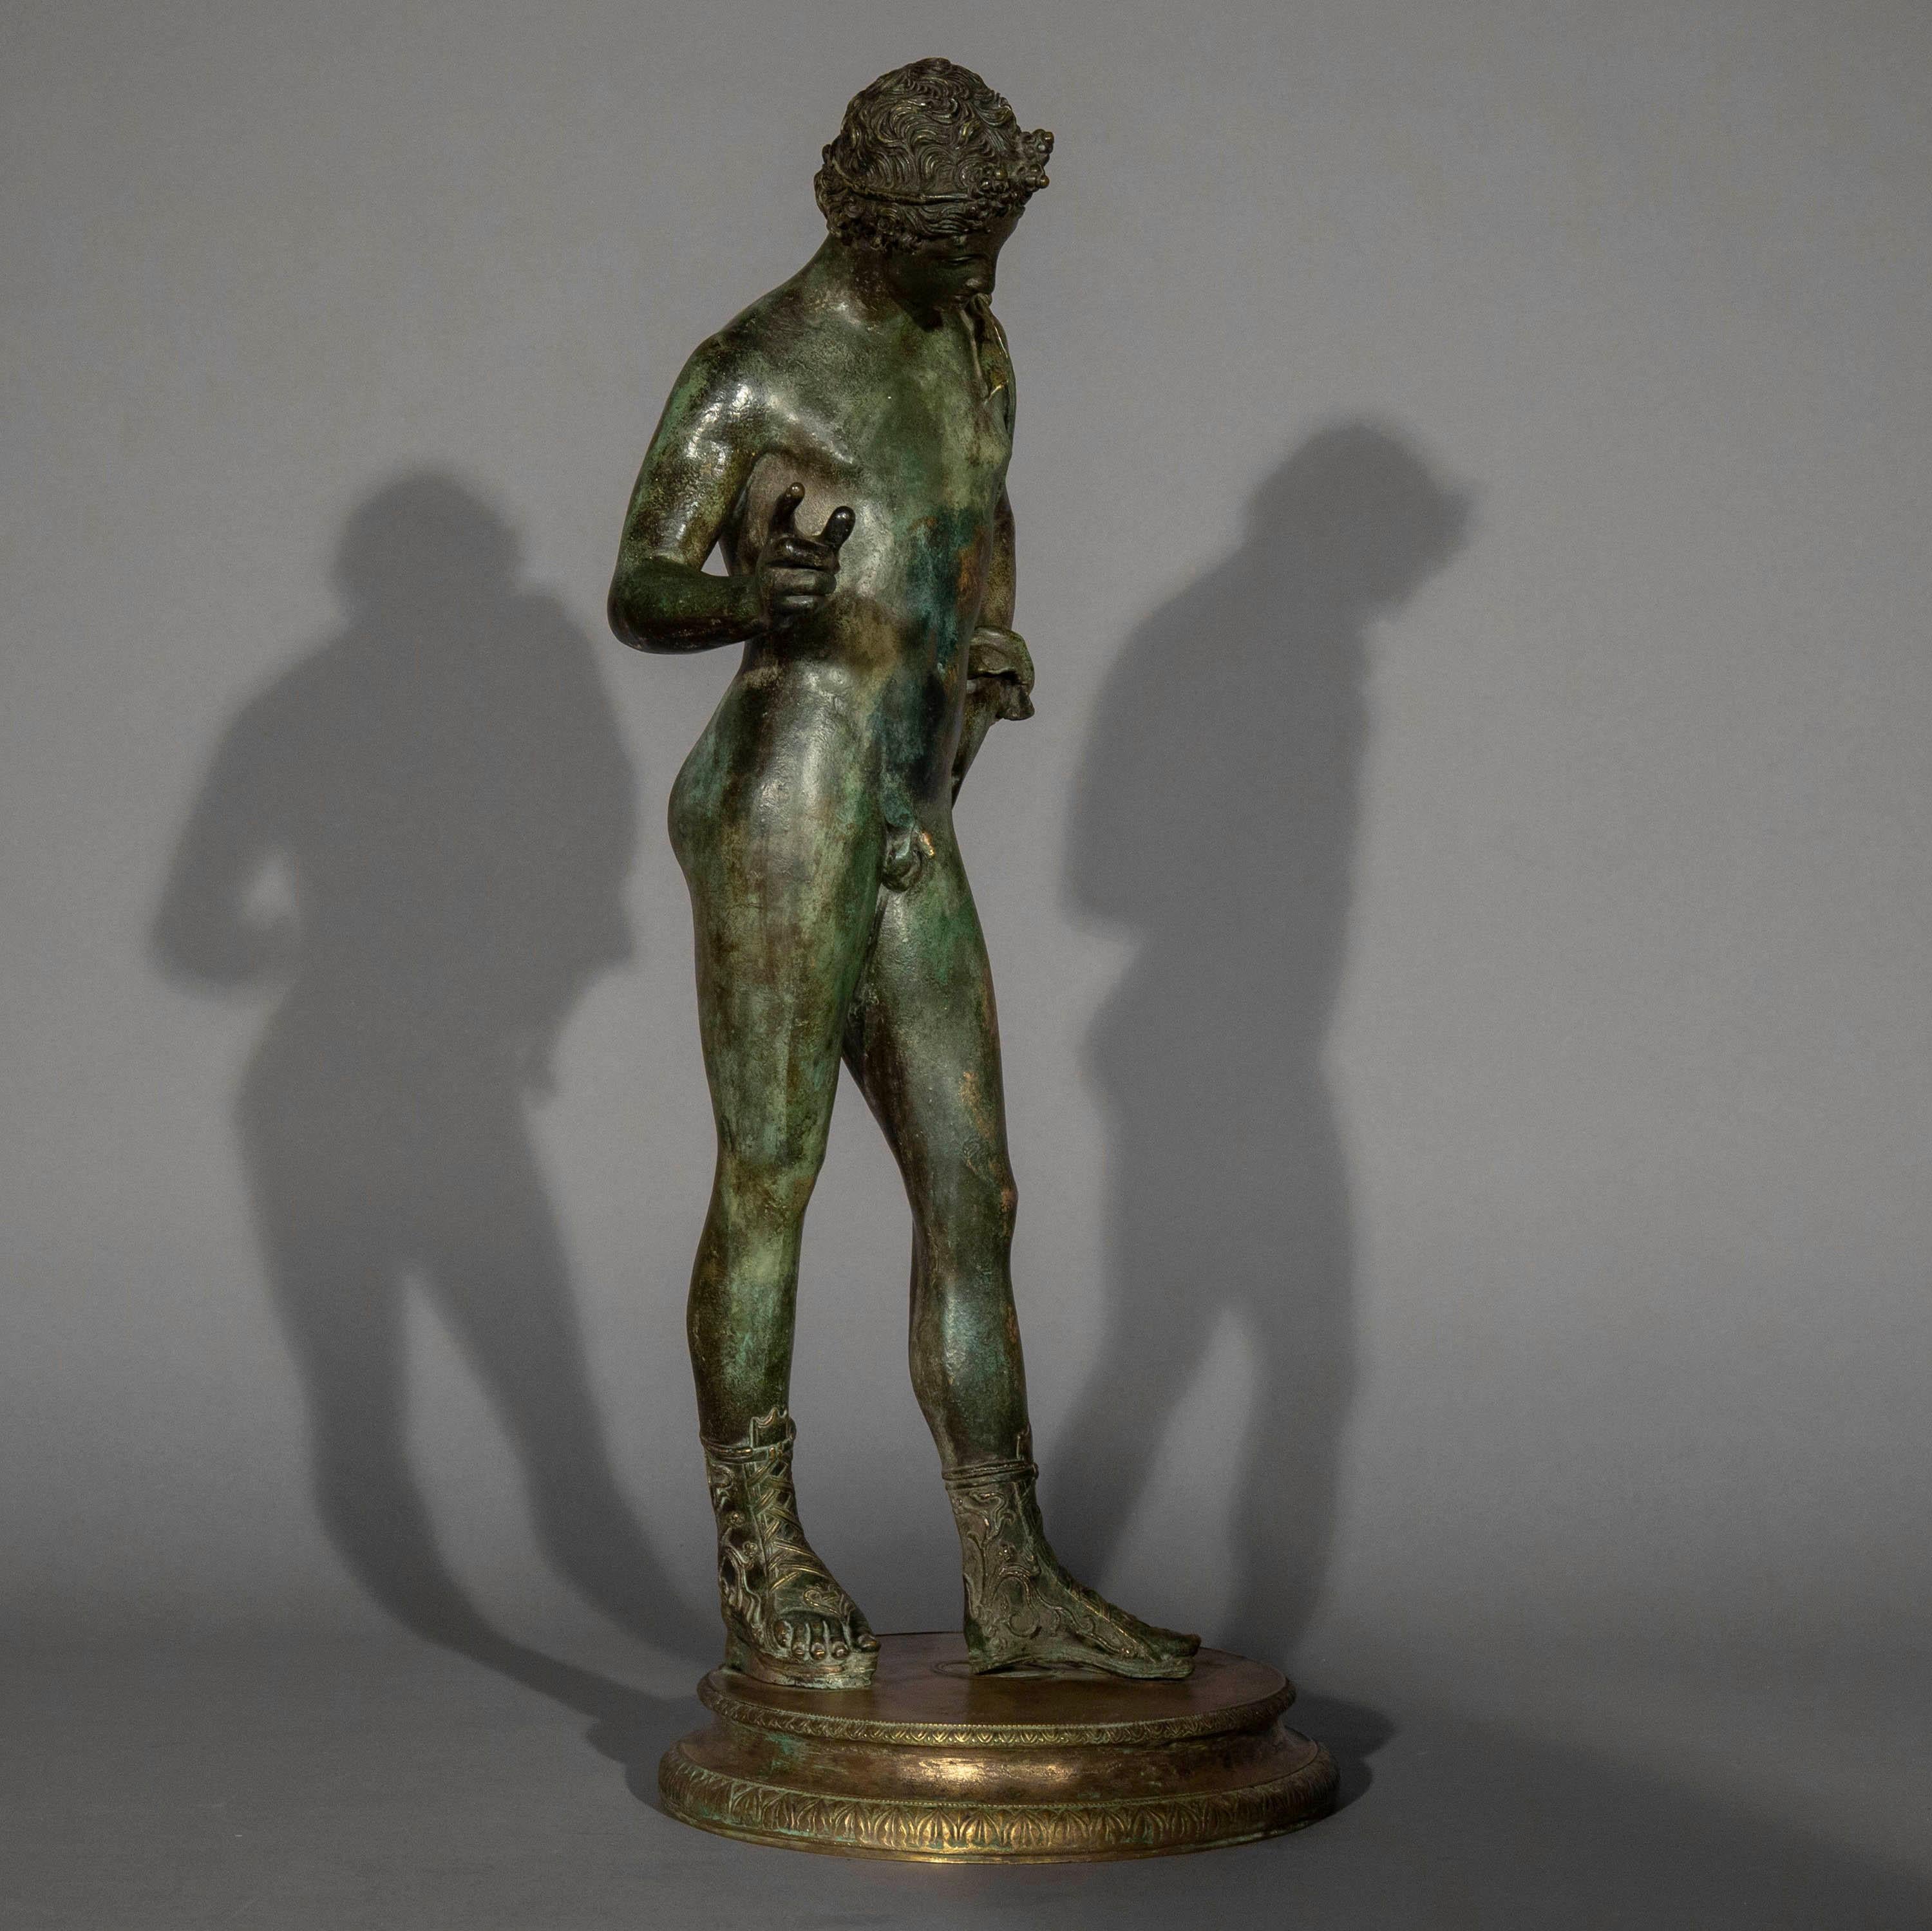 A very decorative 'Grand Tour' patinated bronze figure of a young man, representing Dionysos (Bacchus), previously thought to be Narcissus. By the Sommer foundry, Naples.
Italy, late 19th century

Great quality, original 'verdi-gris' patination.